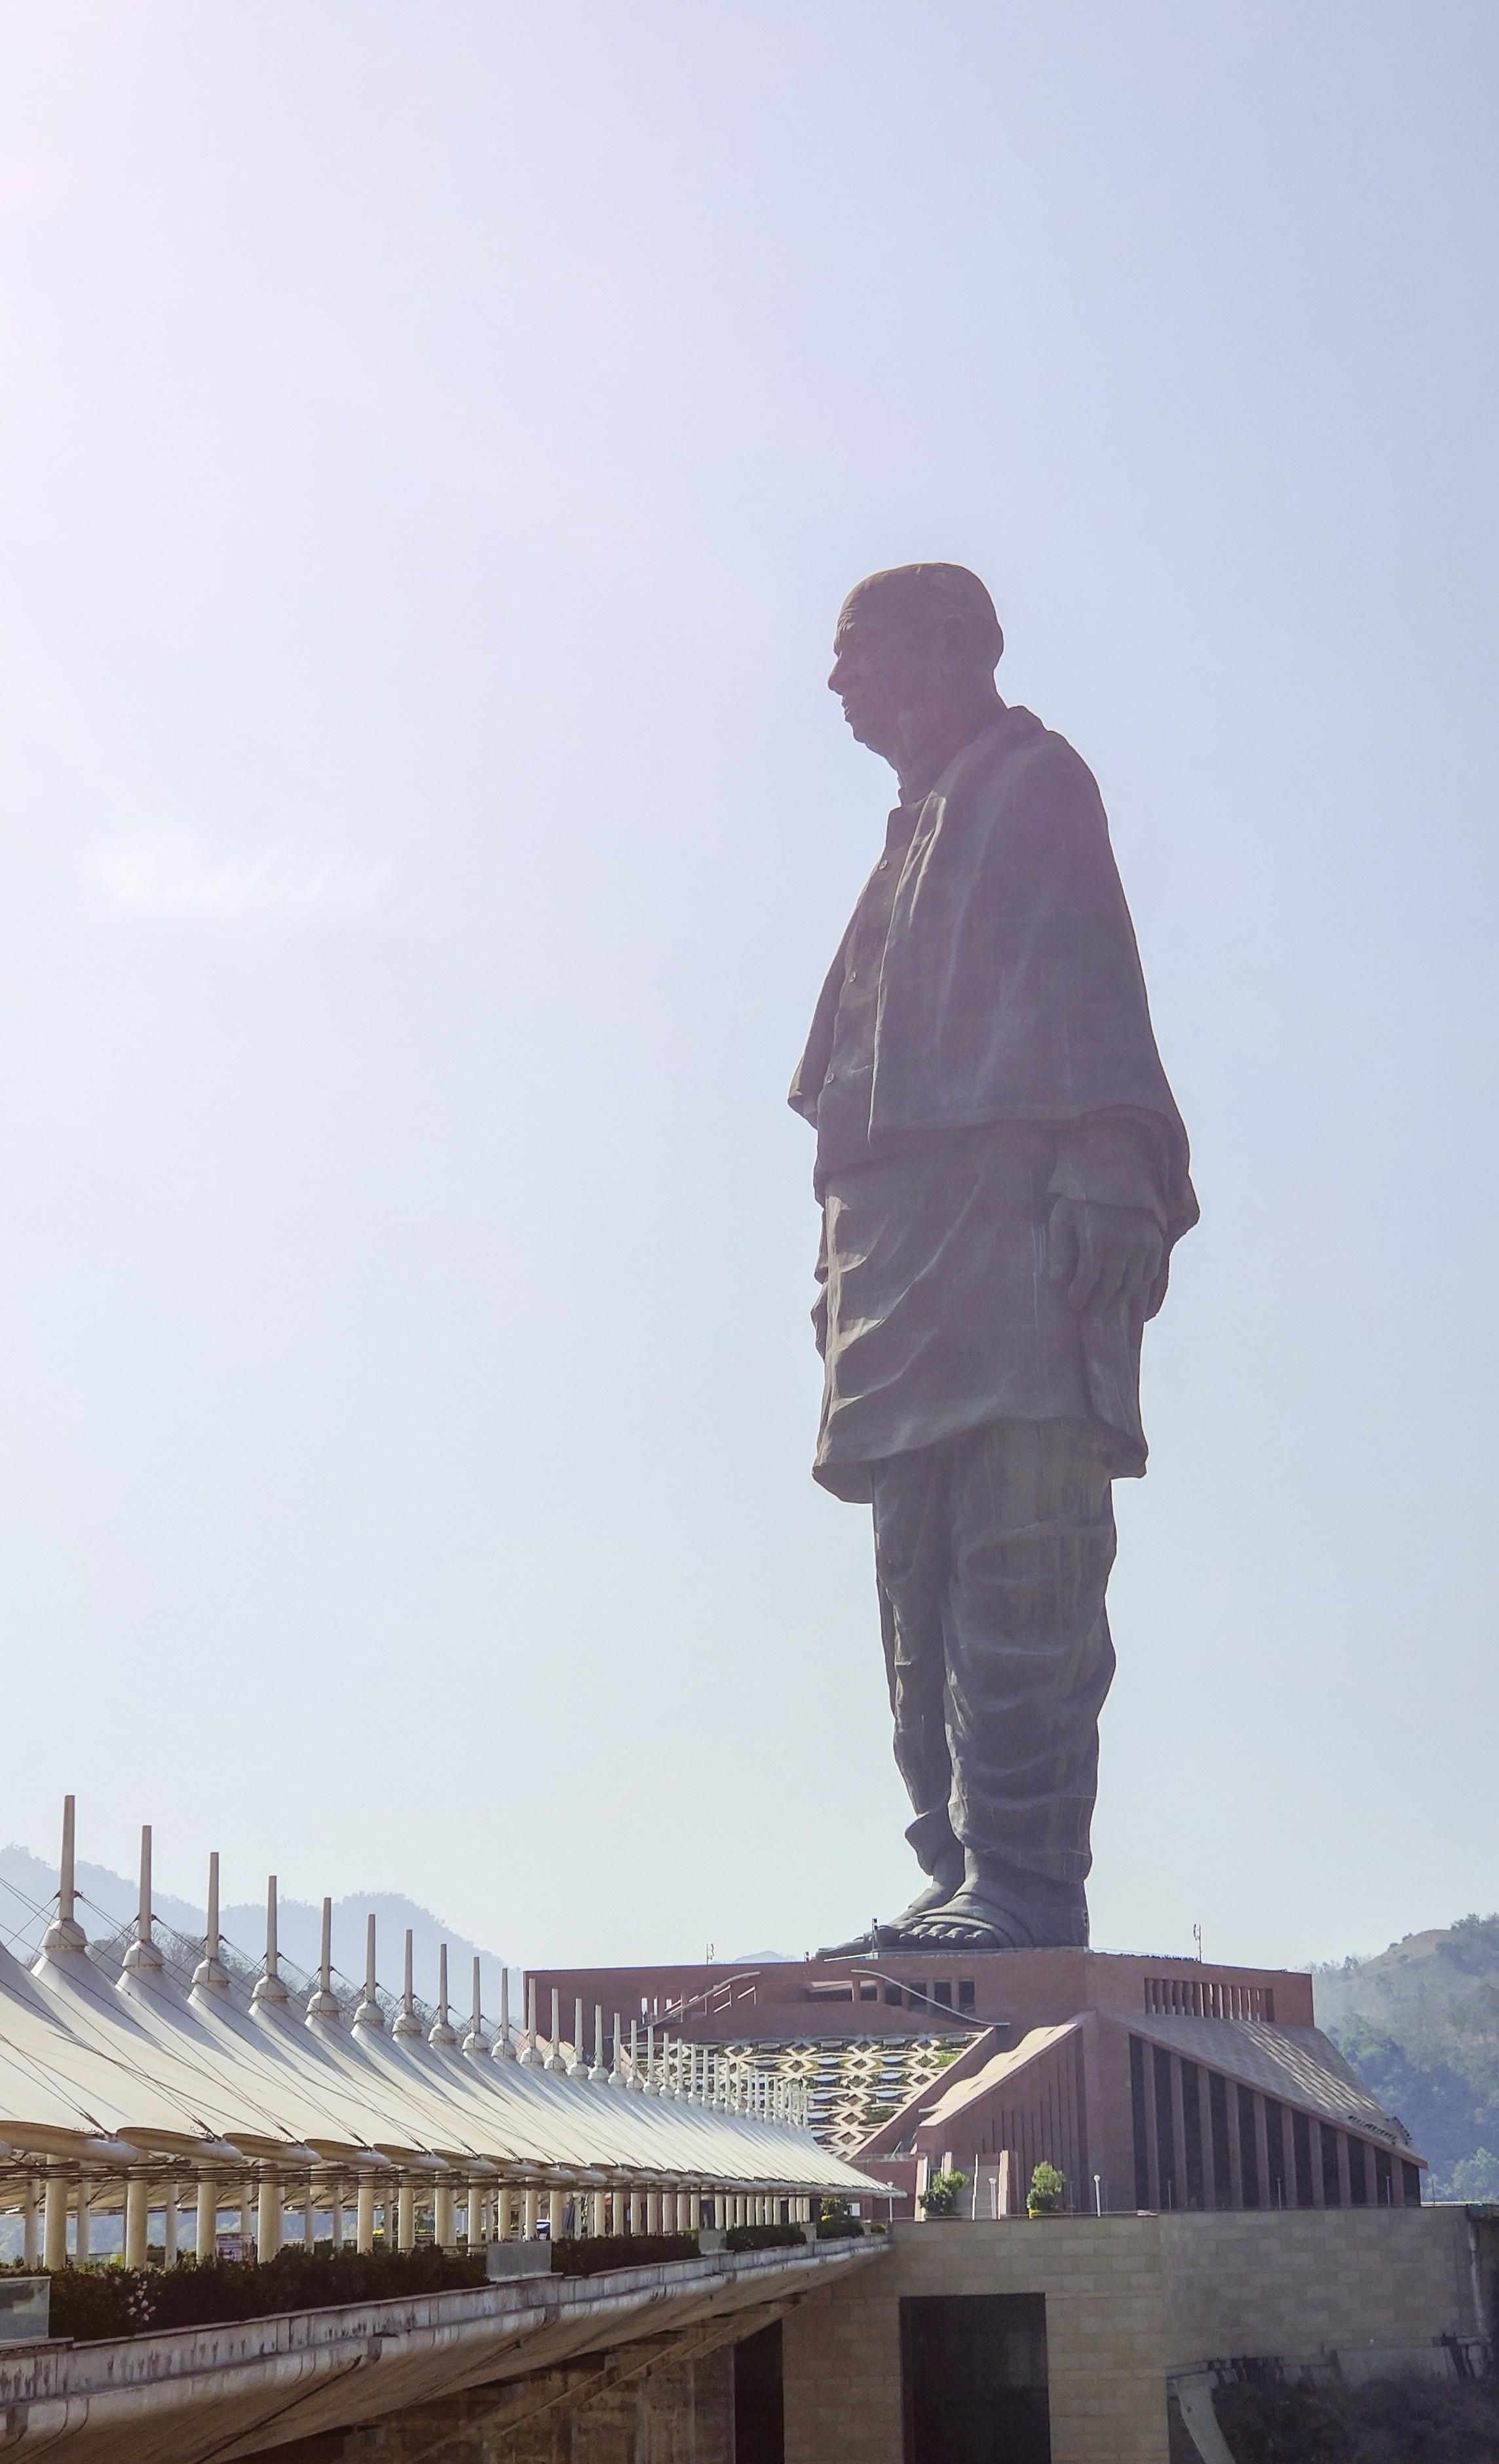 ITAP of the statue of unity.#PHOTO #CAPTURE #NATURE #INCREDIBLE